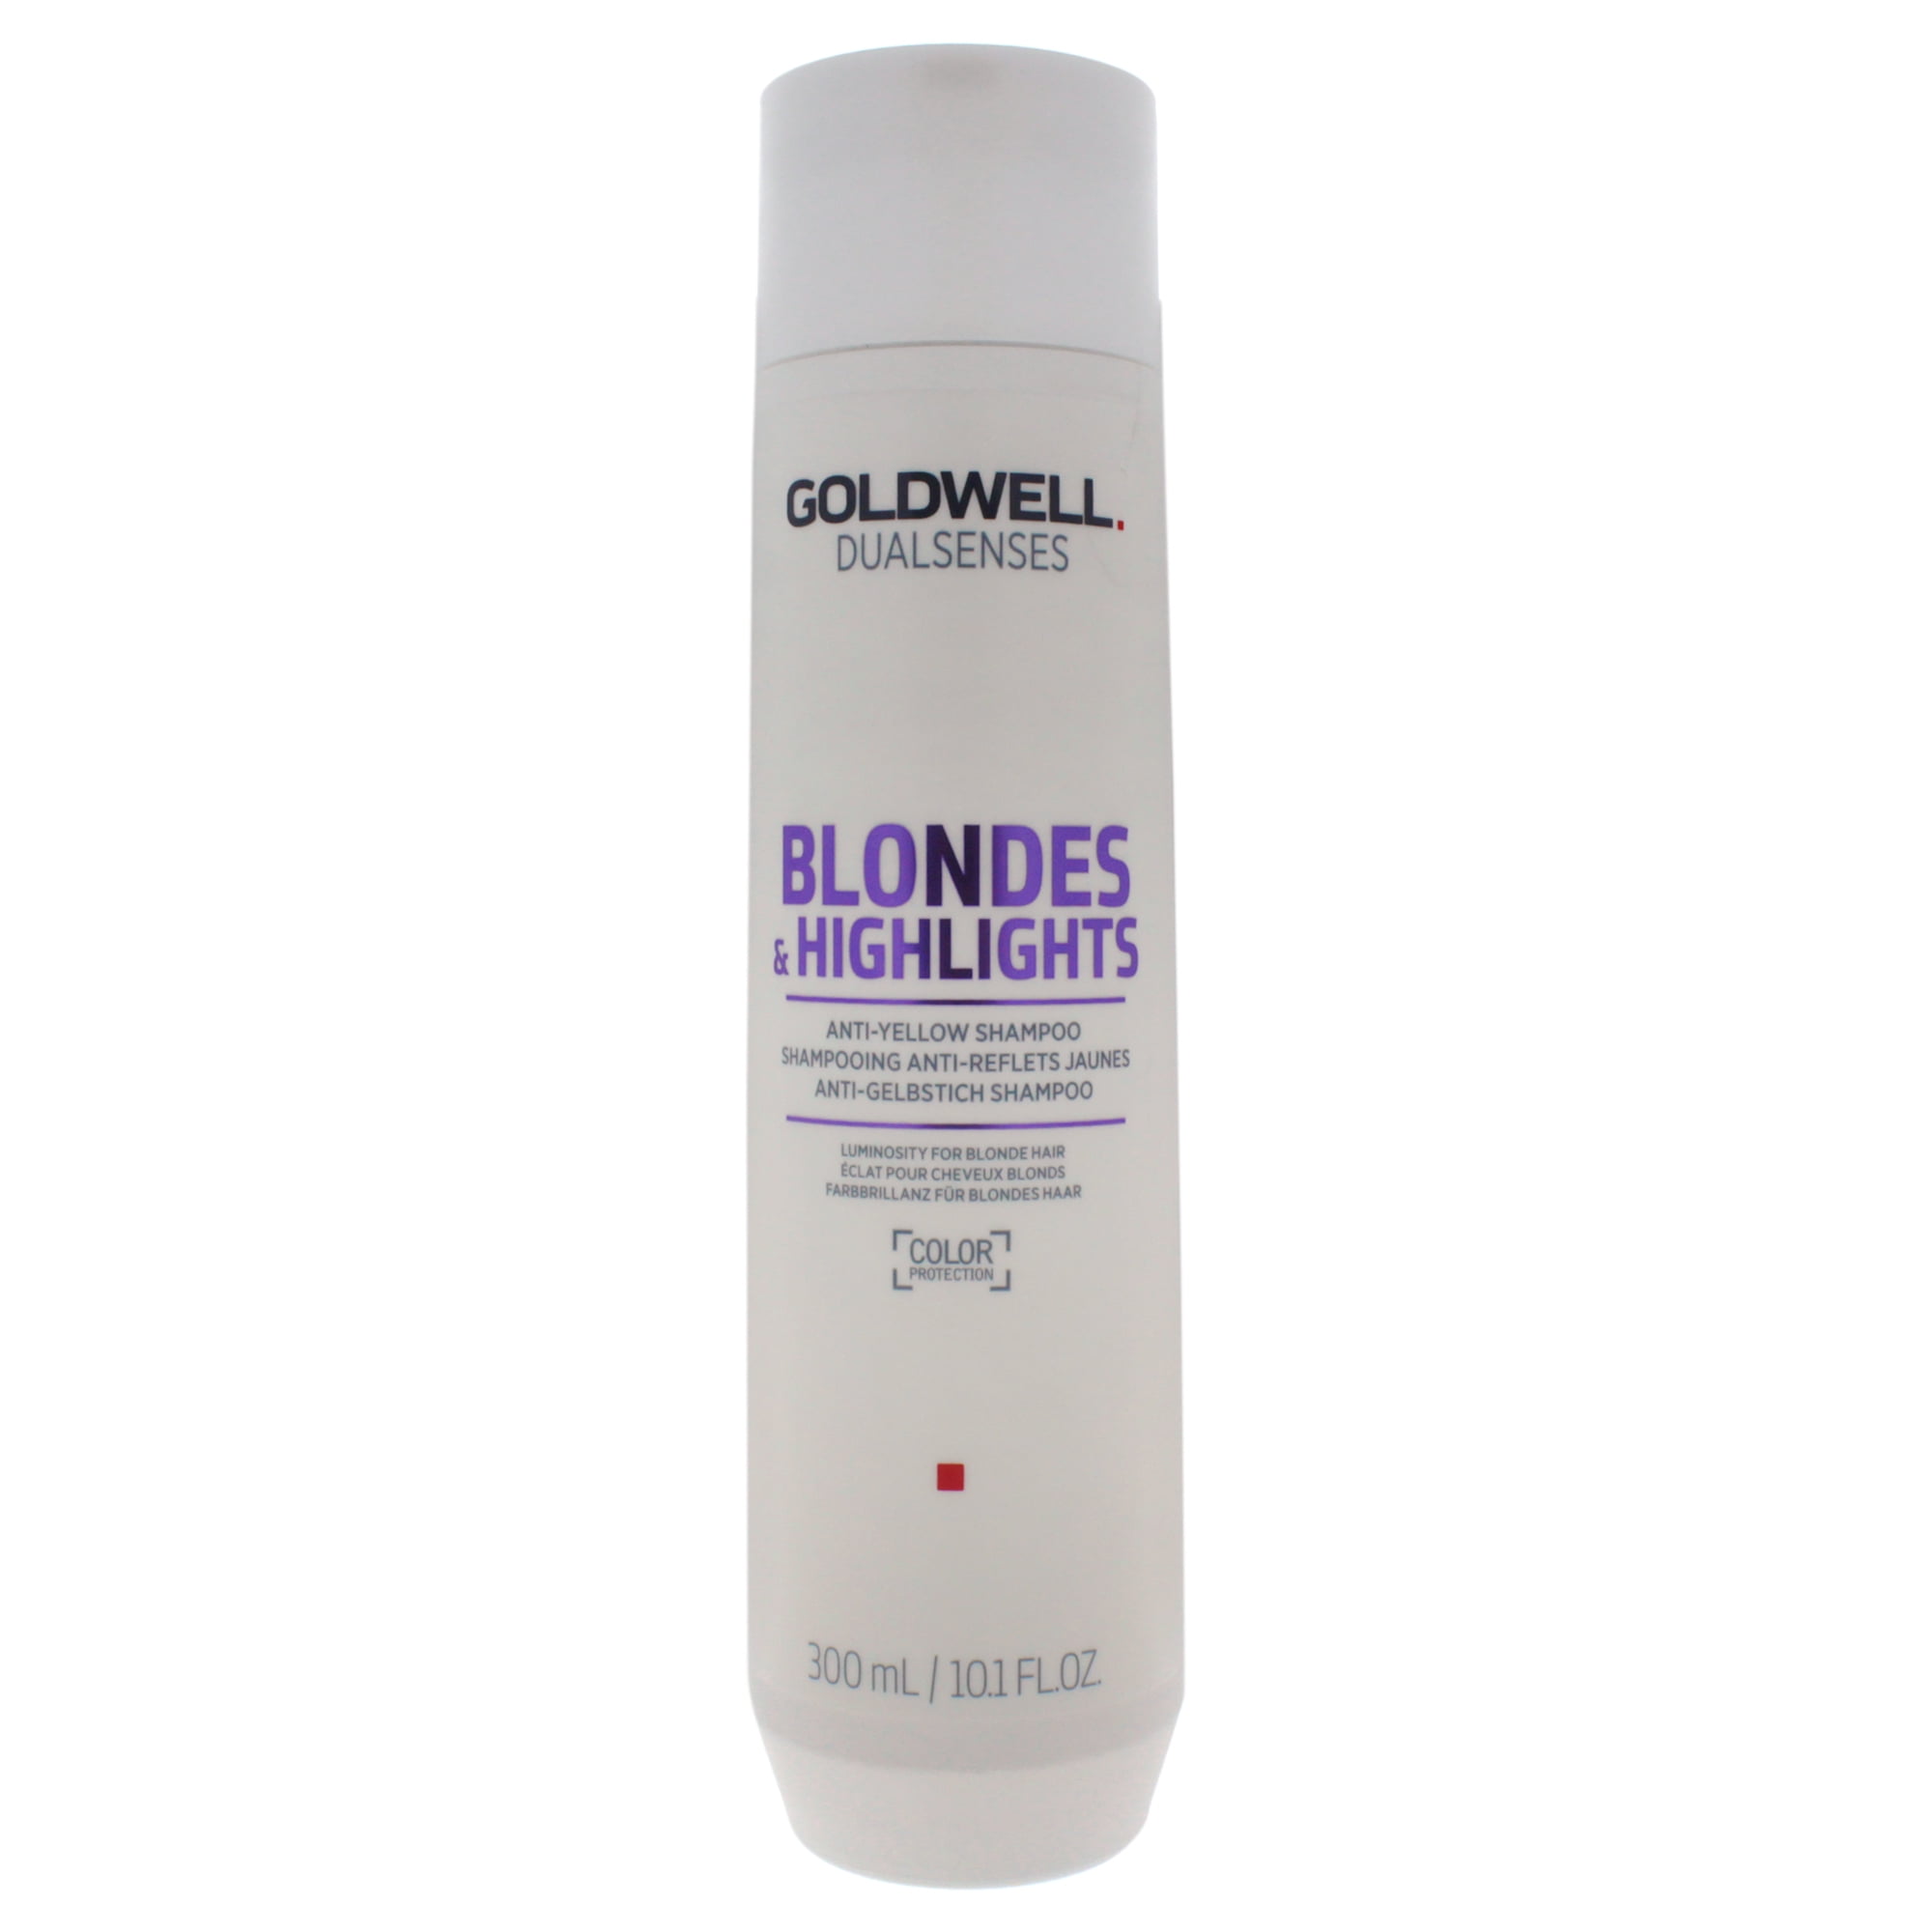 goldwell blondes and highlights szampon